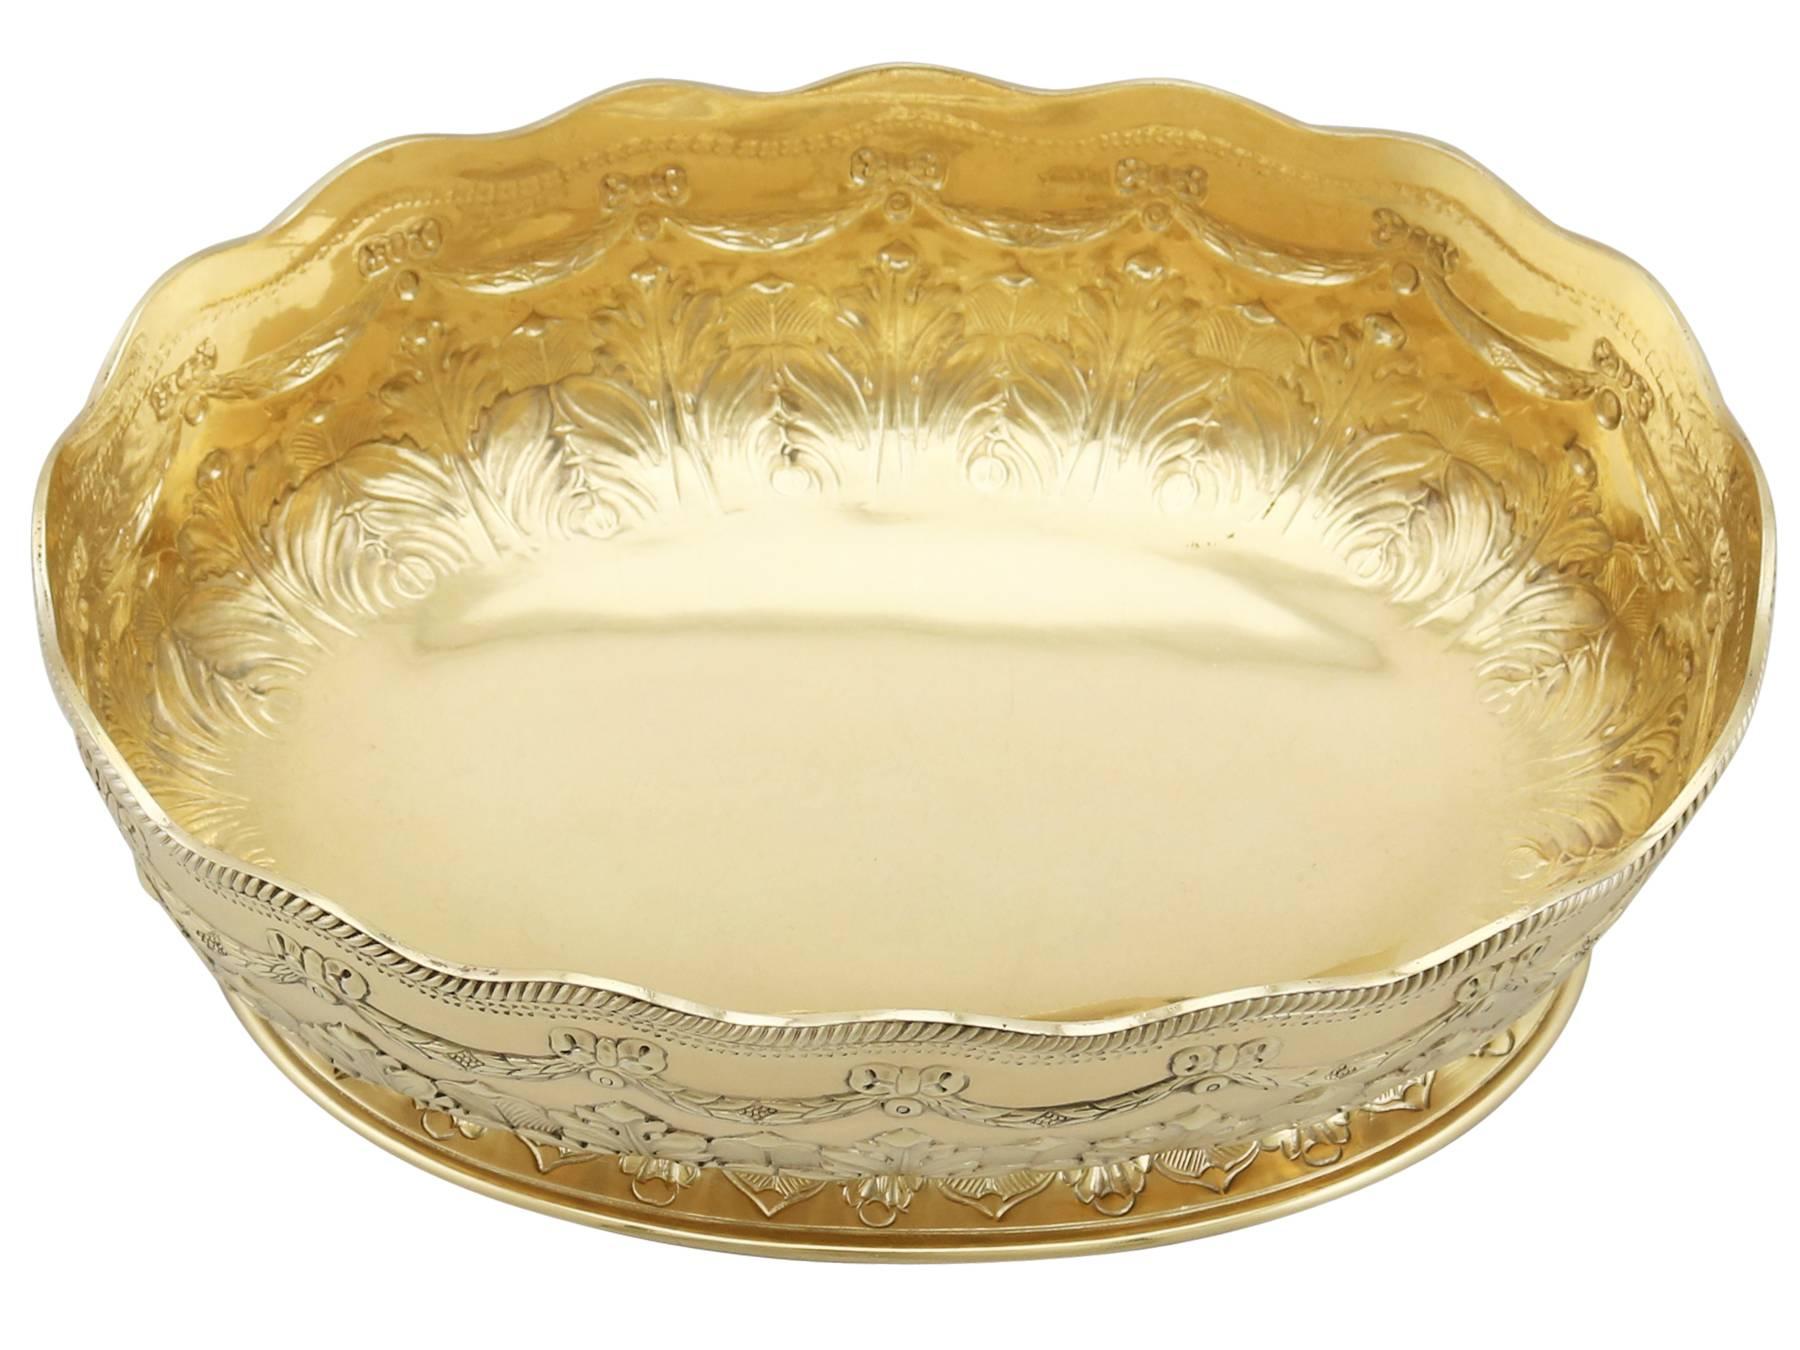 Late 19th Century 1880s Pair of Sterling Silver Gilt Presentation Dishes by Charles Stuart Harris